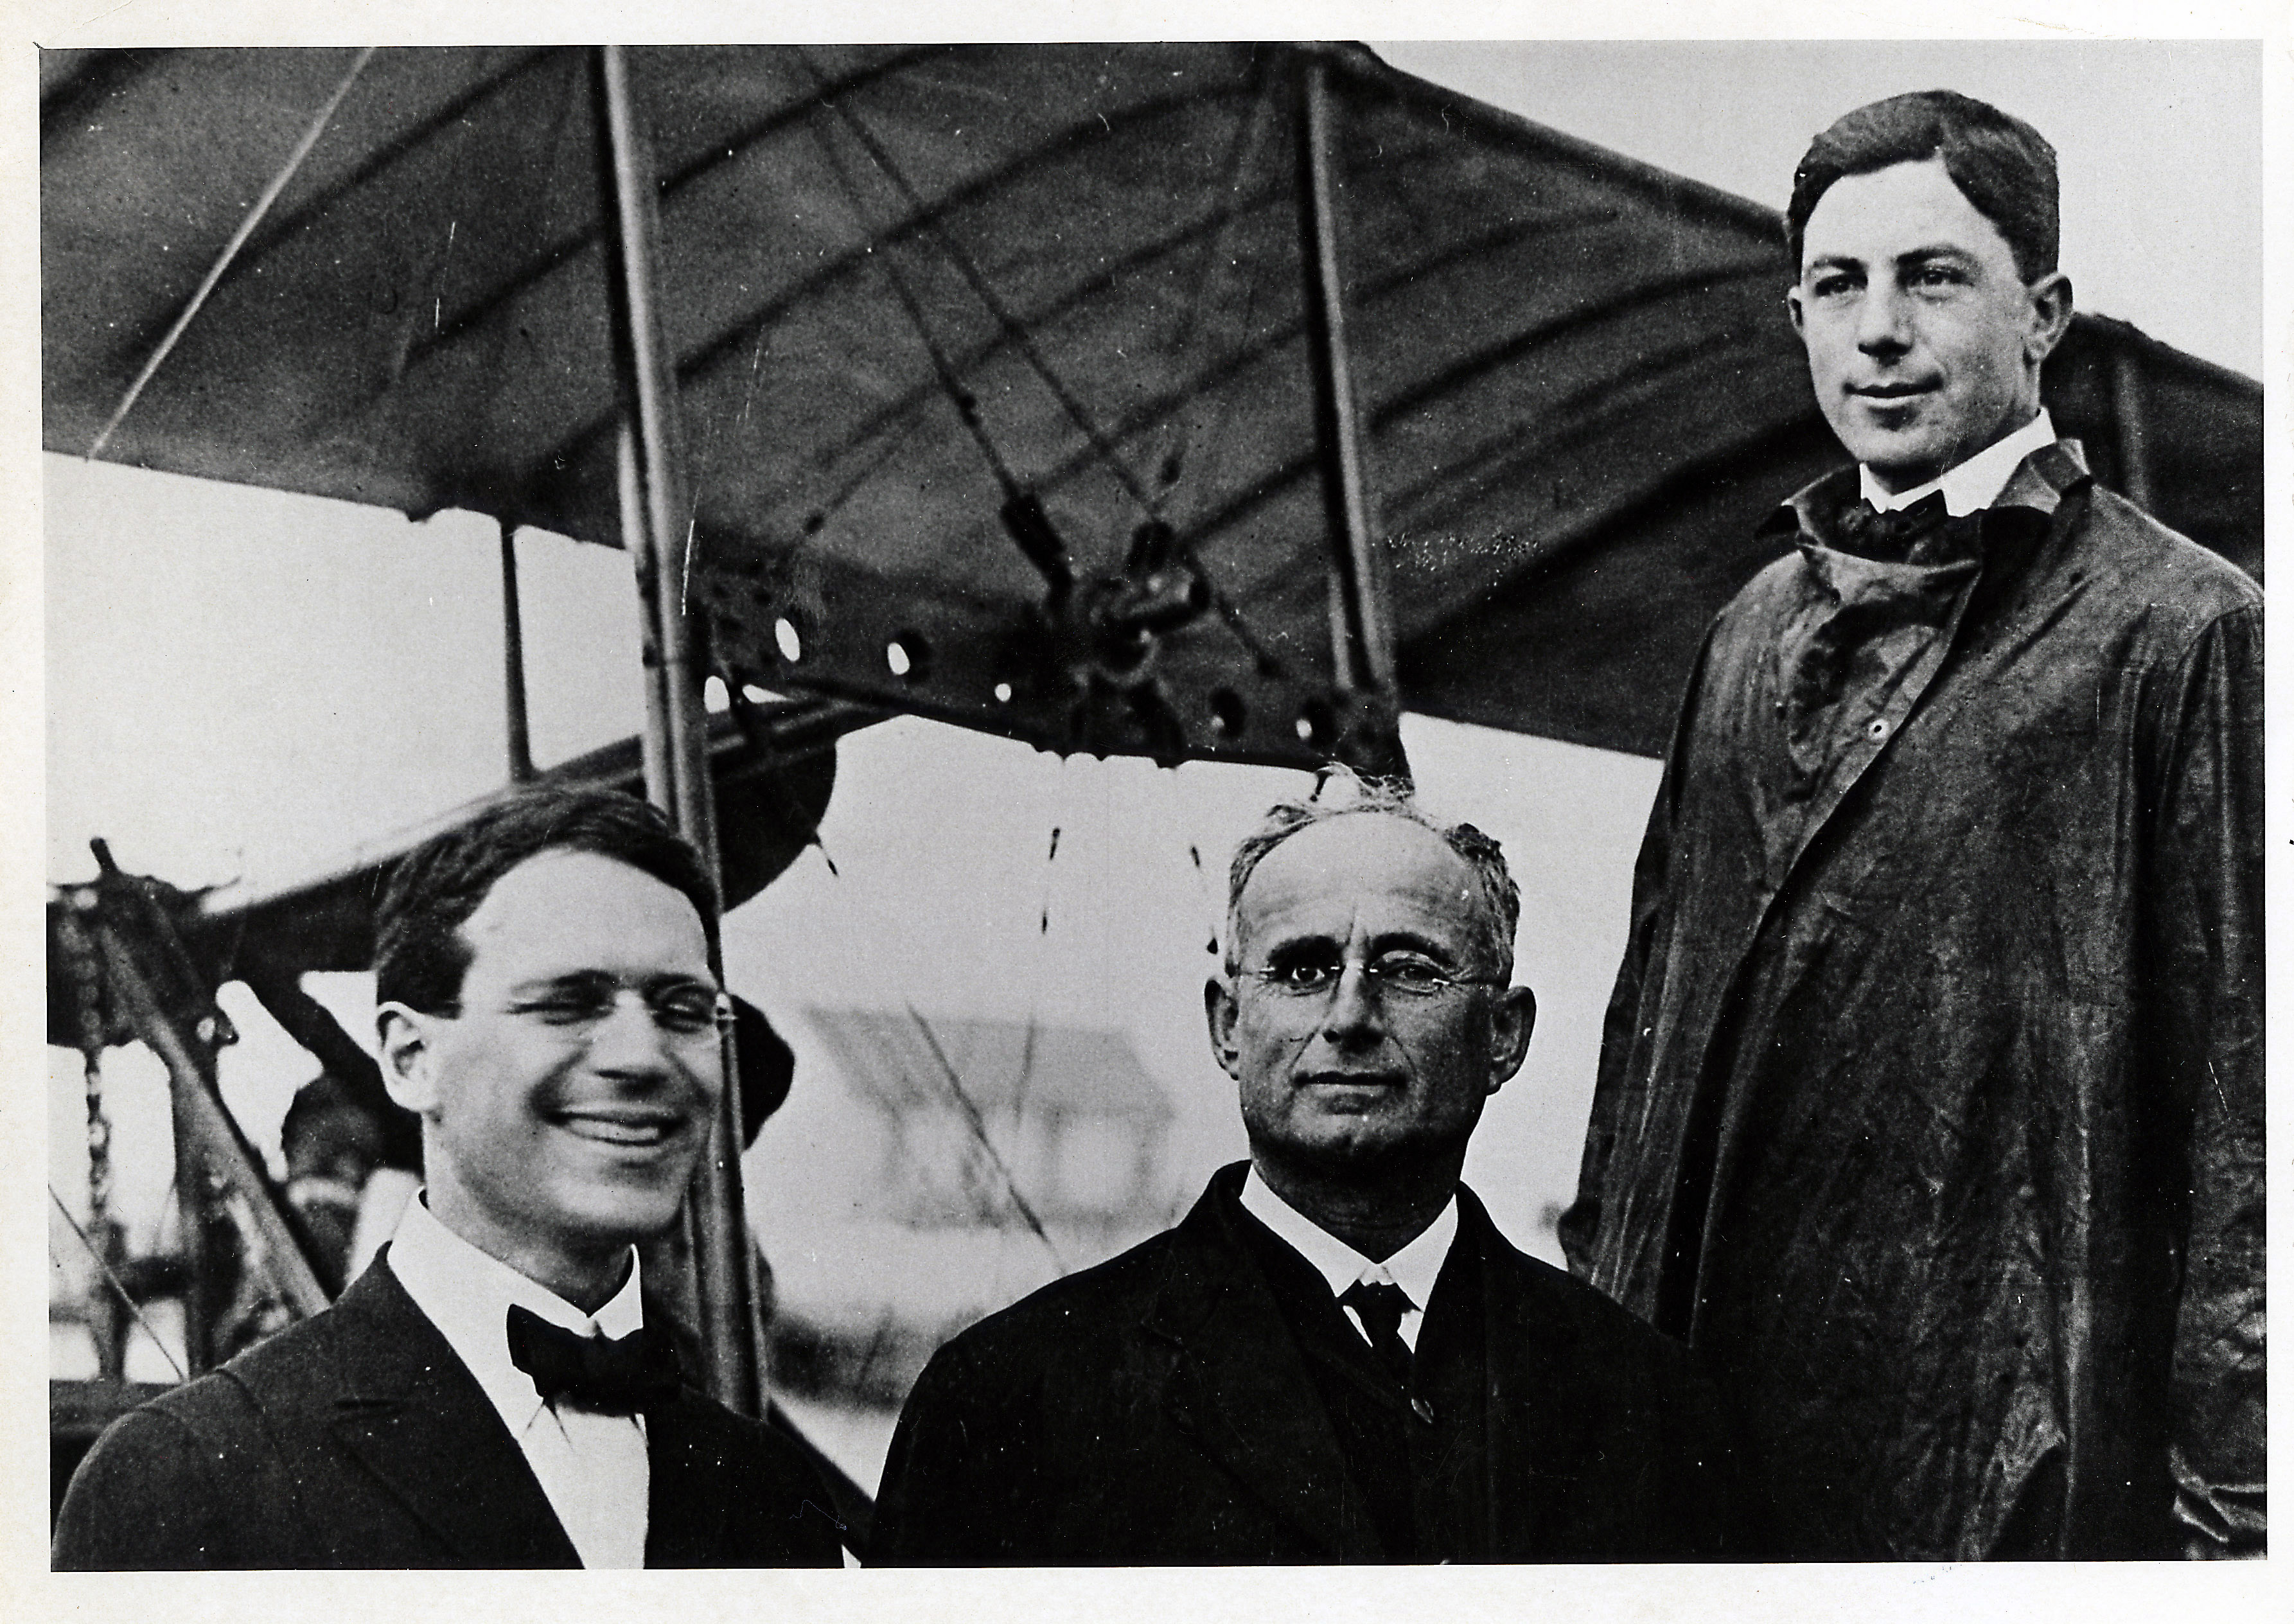 Photo of Percival Elliott Fansler, Abram C. Pheil, and Tony Jannus pose before the inaugural flight of the St. Petersburg-Tampa Airboat Line — the world's first airline.